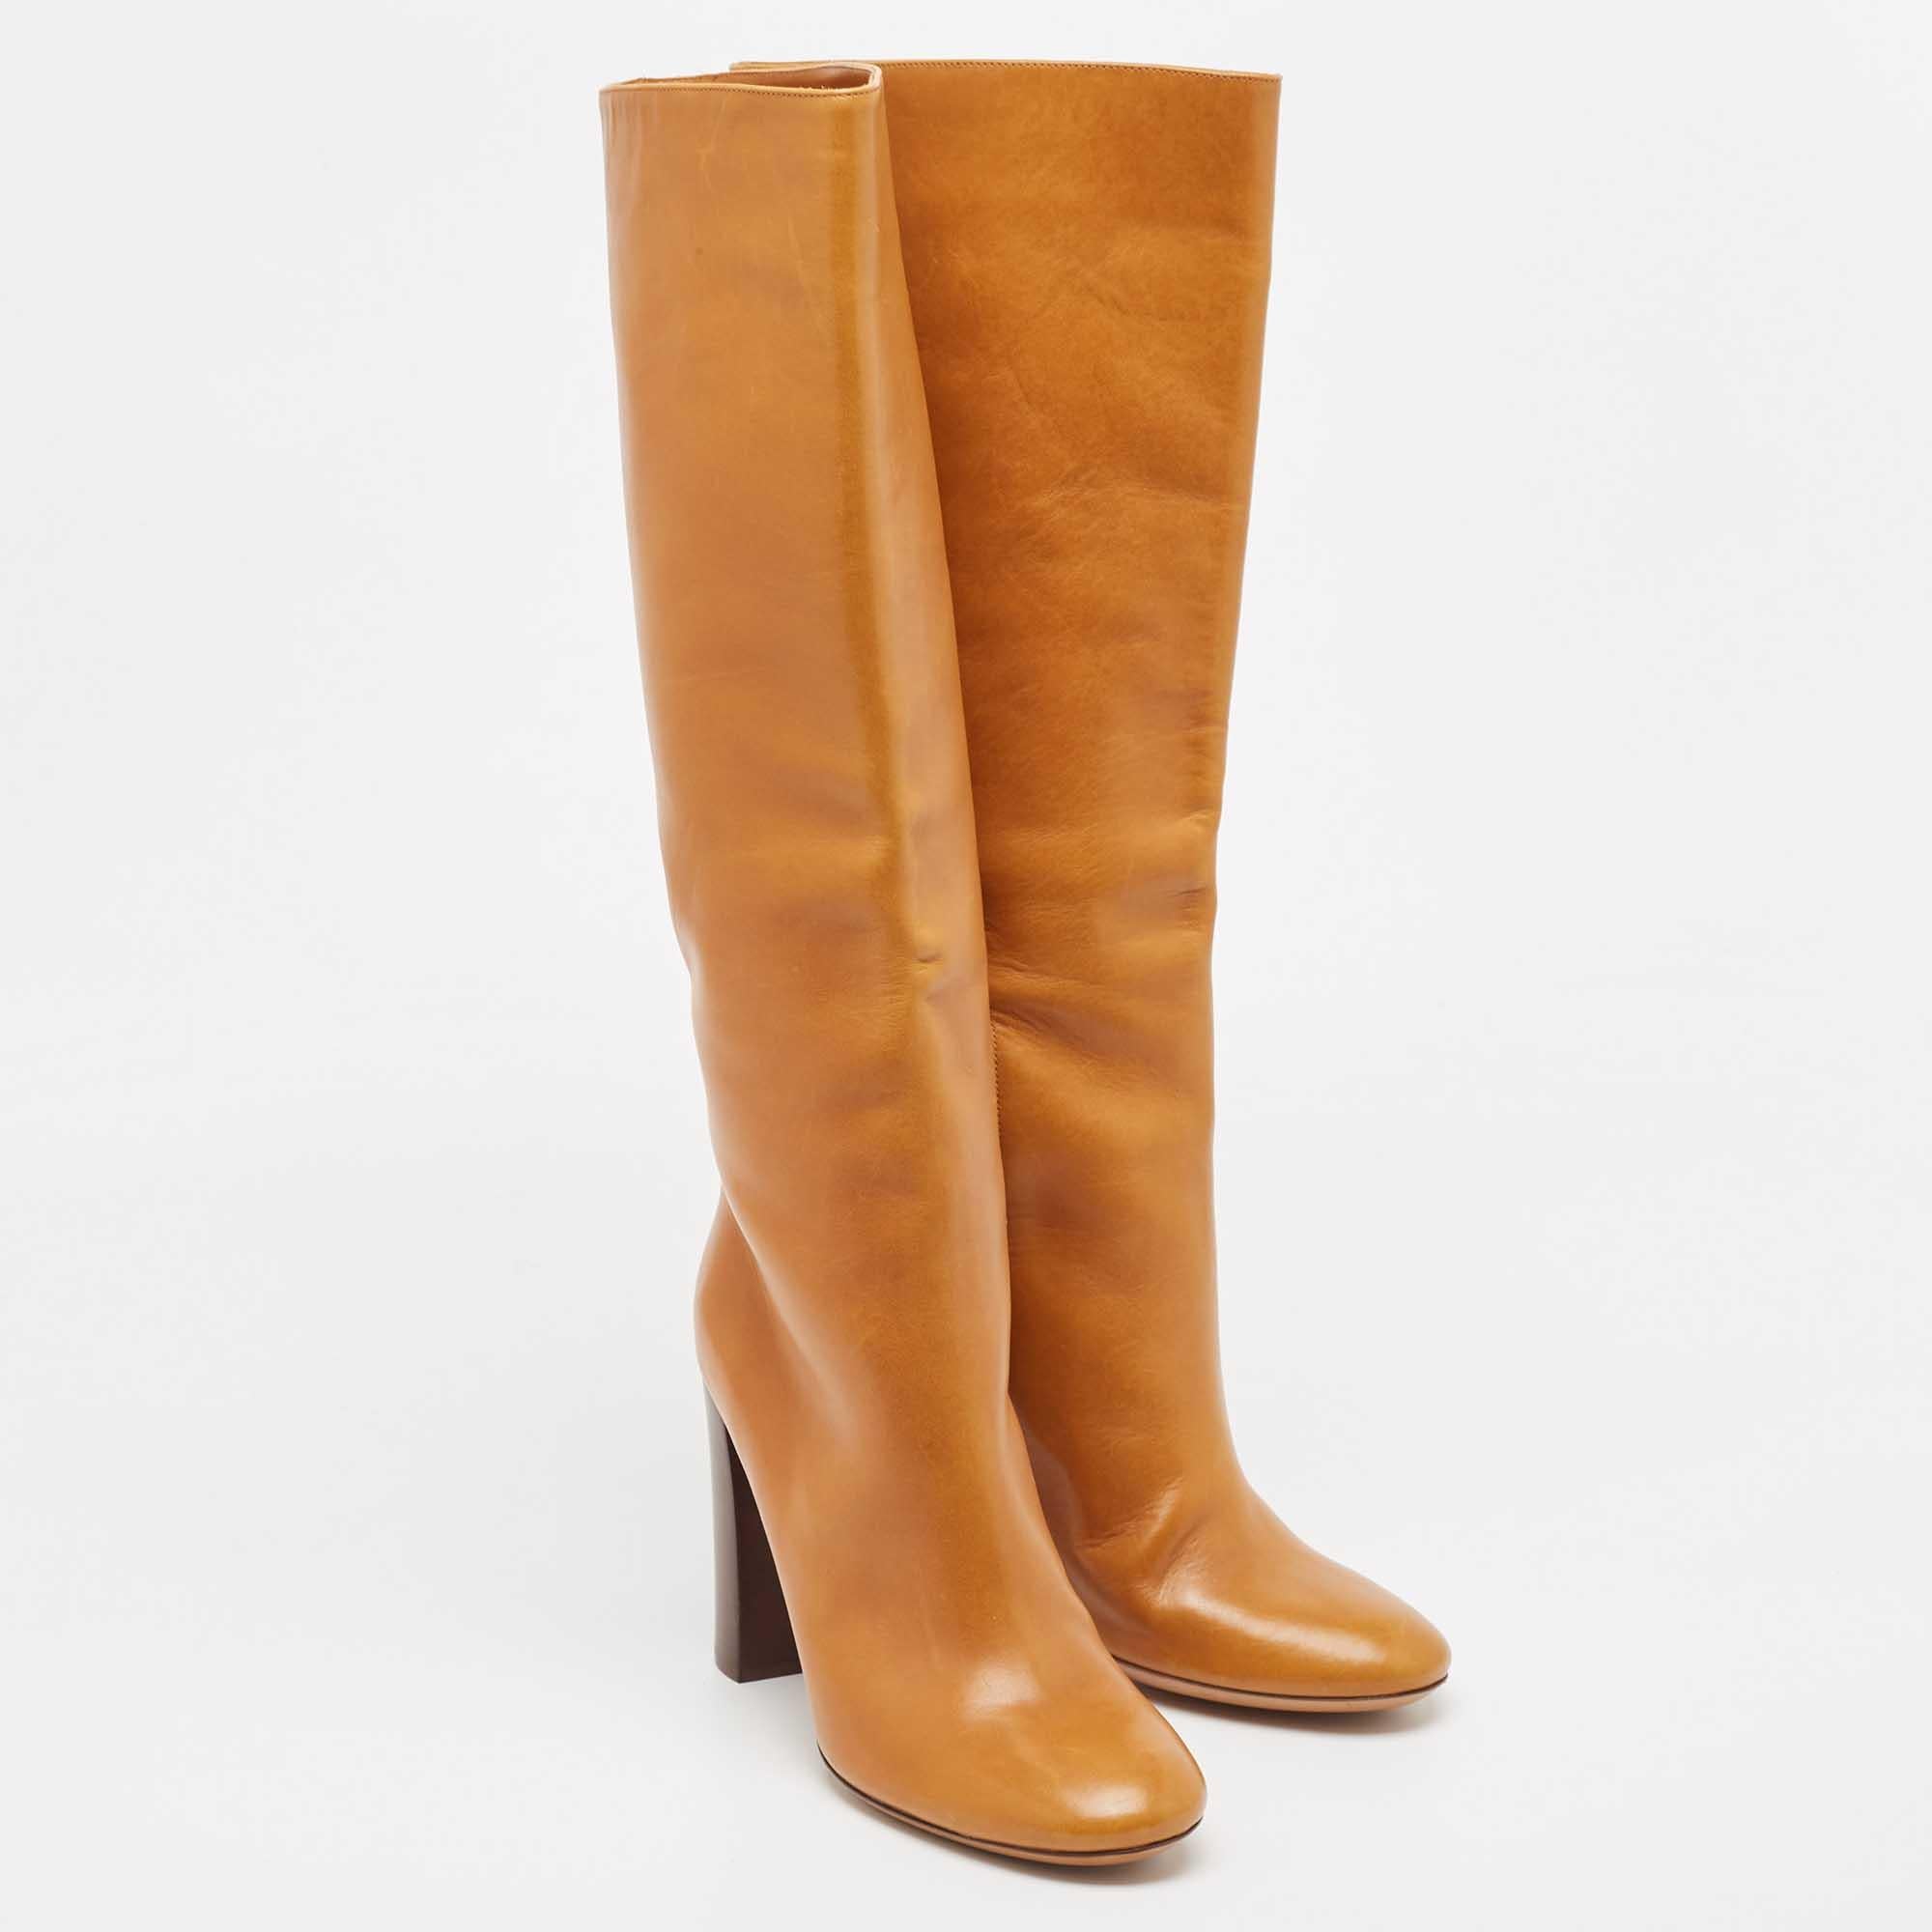 Chloe Brown Leather Knee Length Boots Size 41 In Excellent Condition For Sale In Dubai, Al Qouz 2